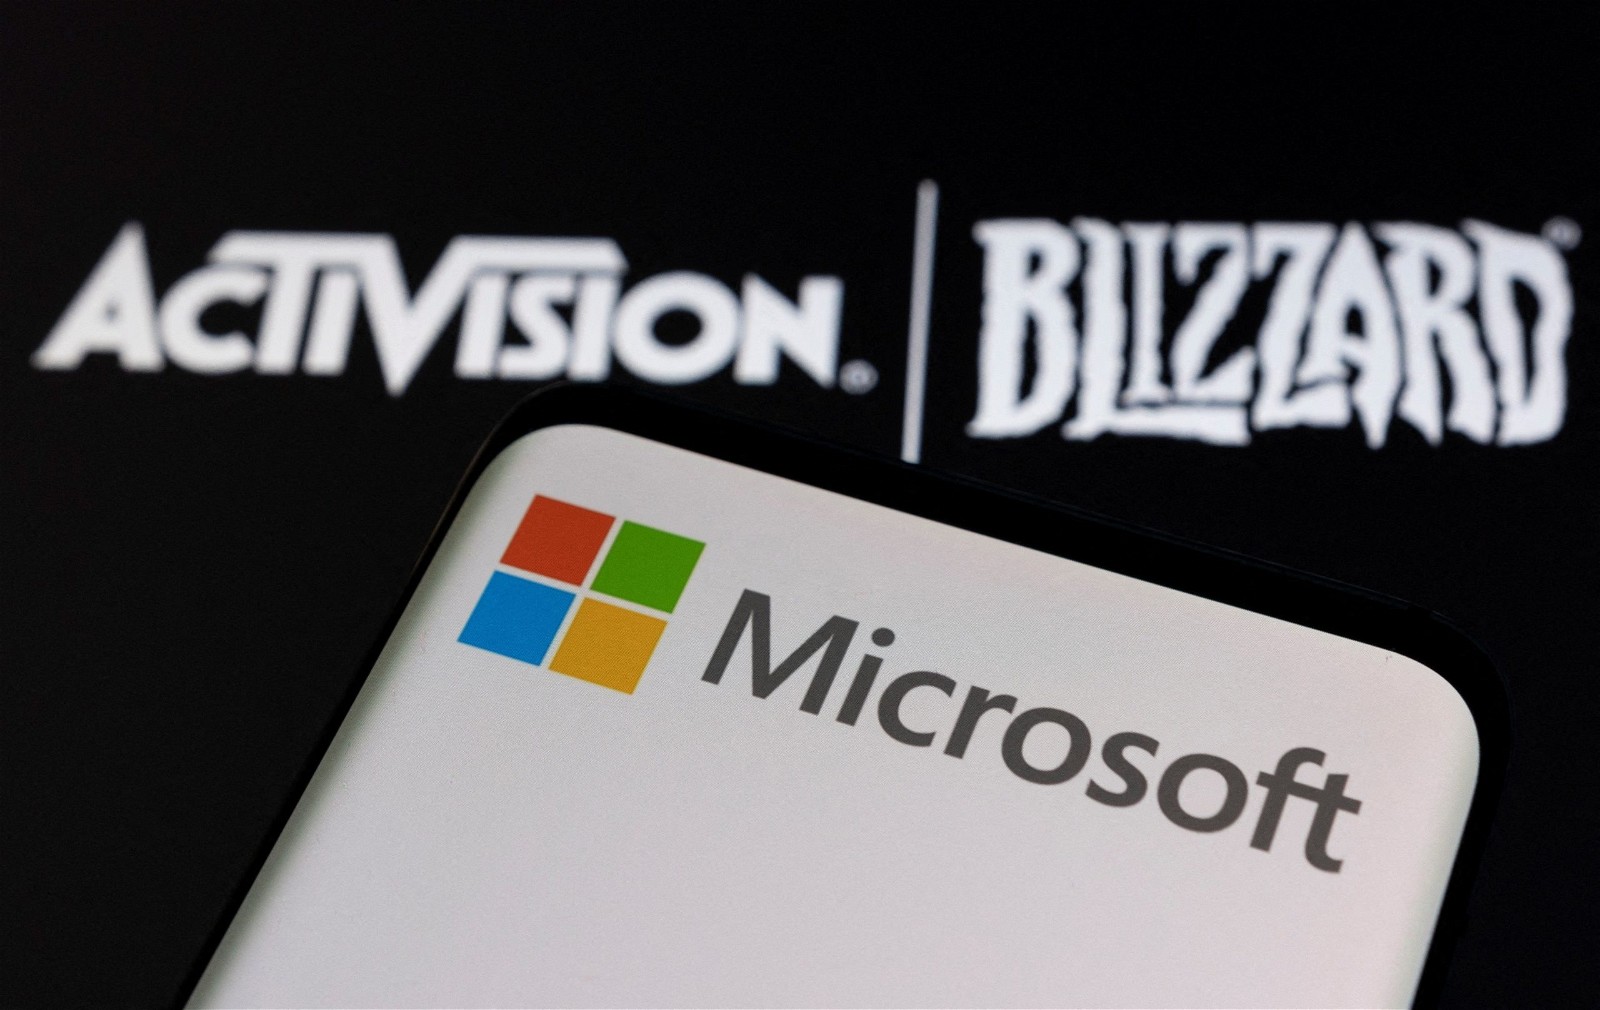 The Microsoft-Activision Blizzard deal